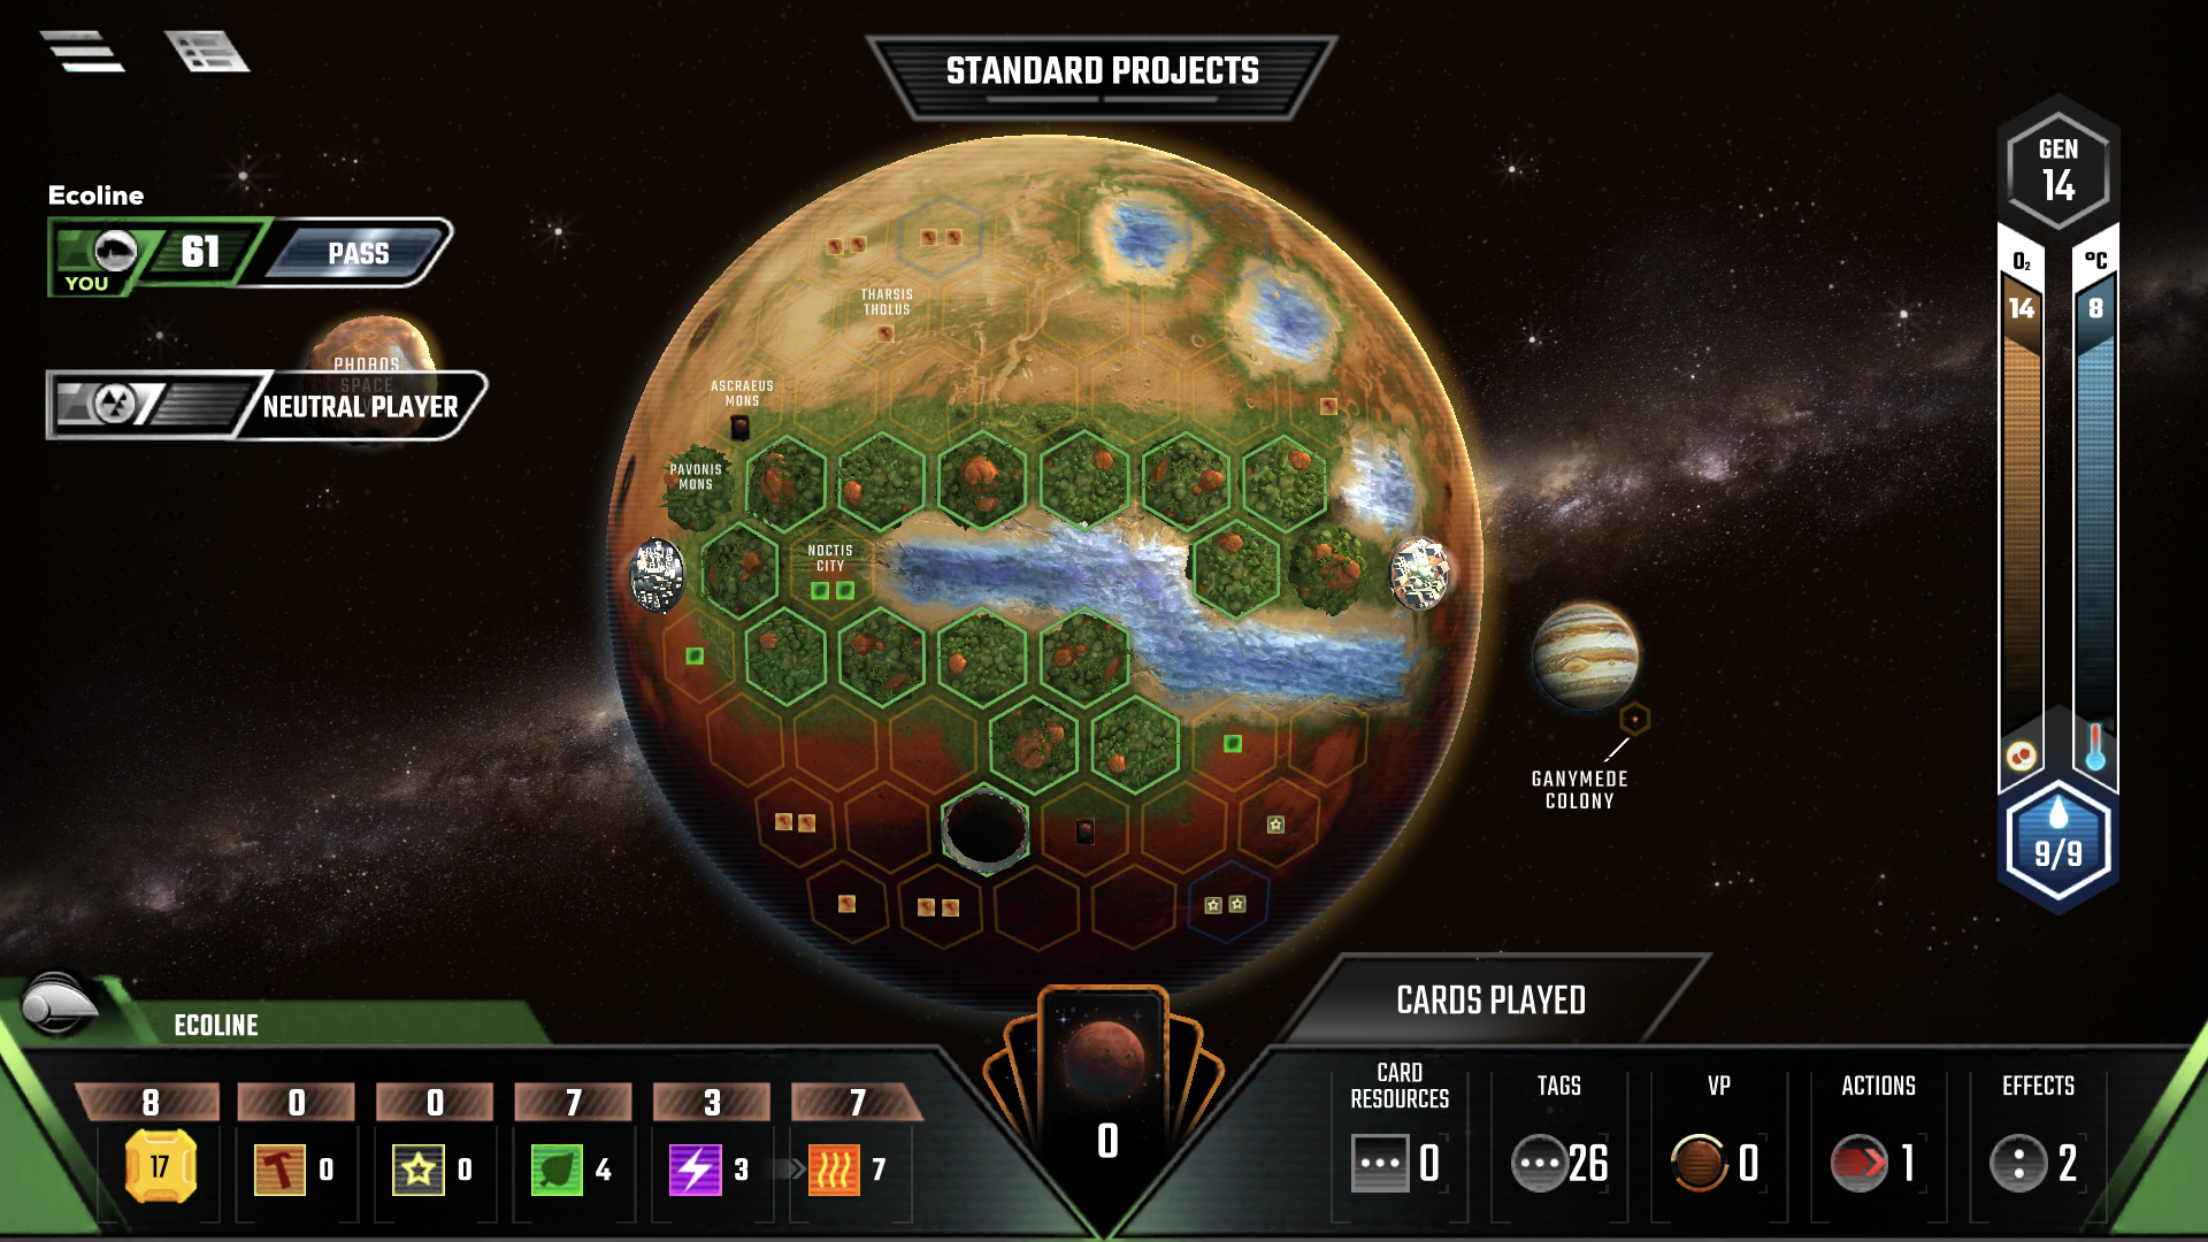 terraforming games online free android